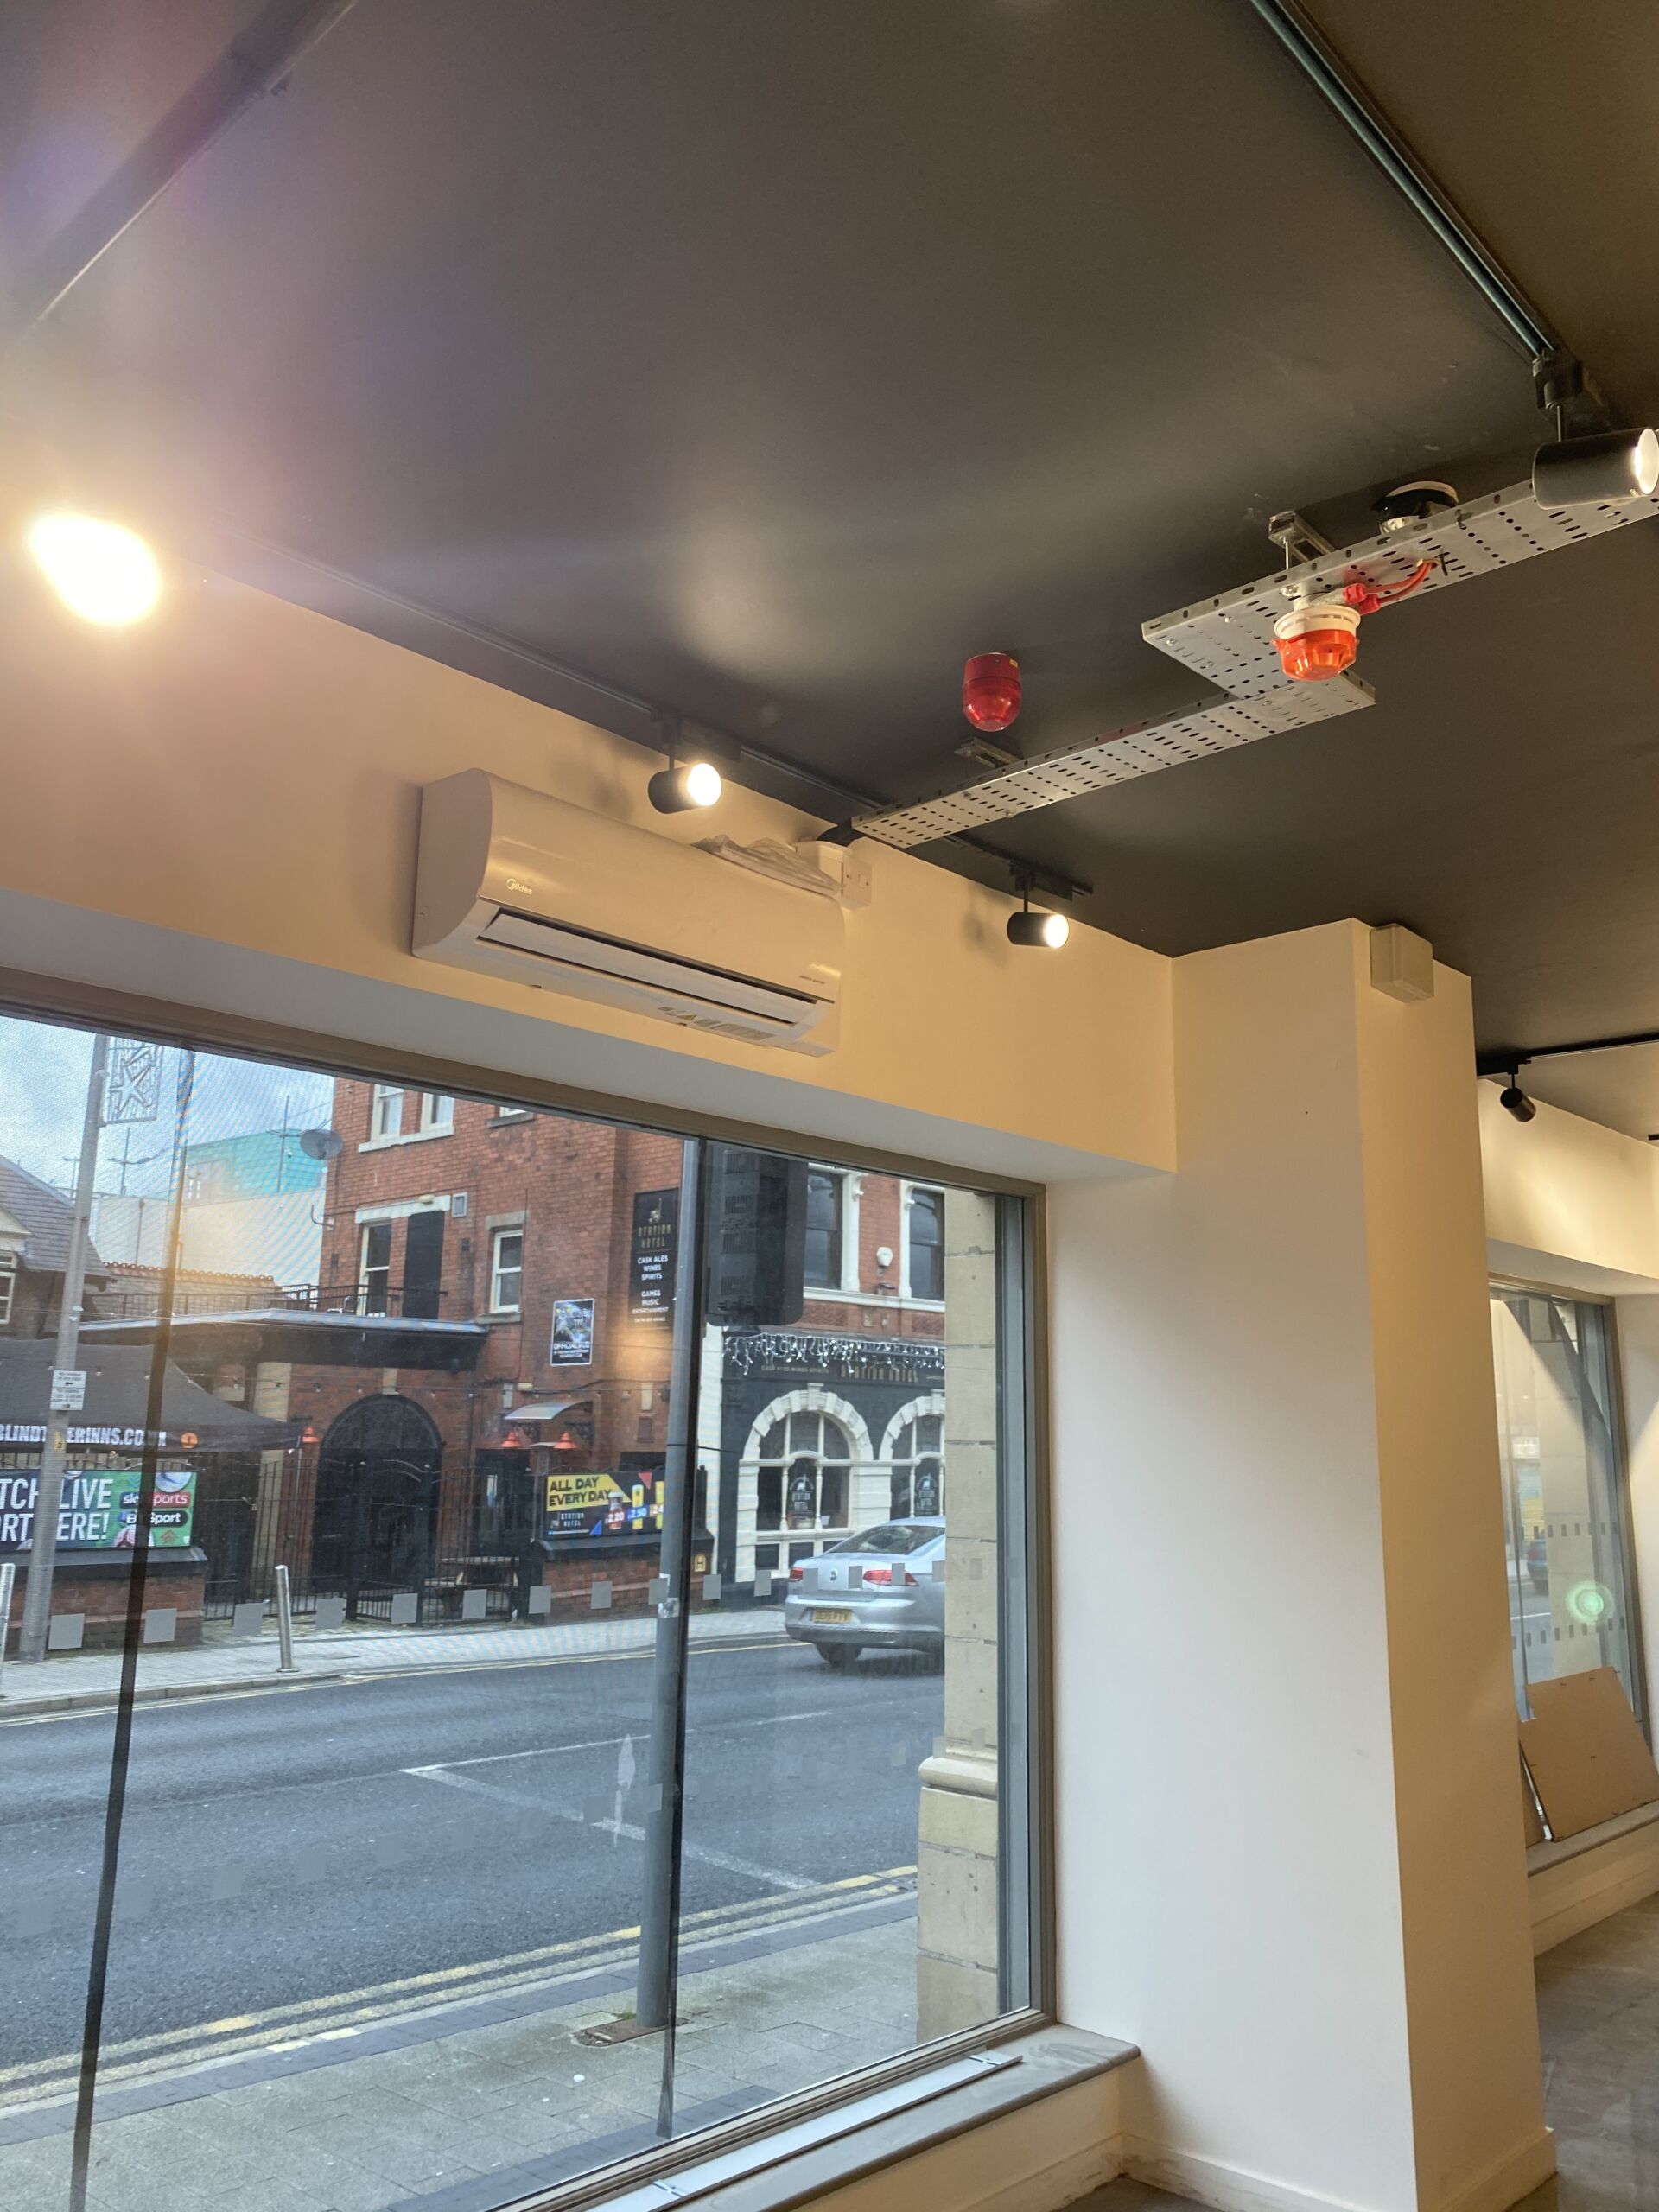 Air conditioning unit installed on a wall in a commercial property